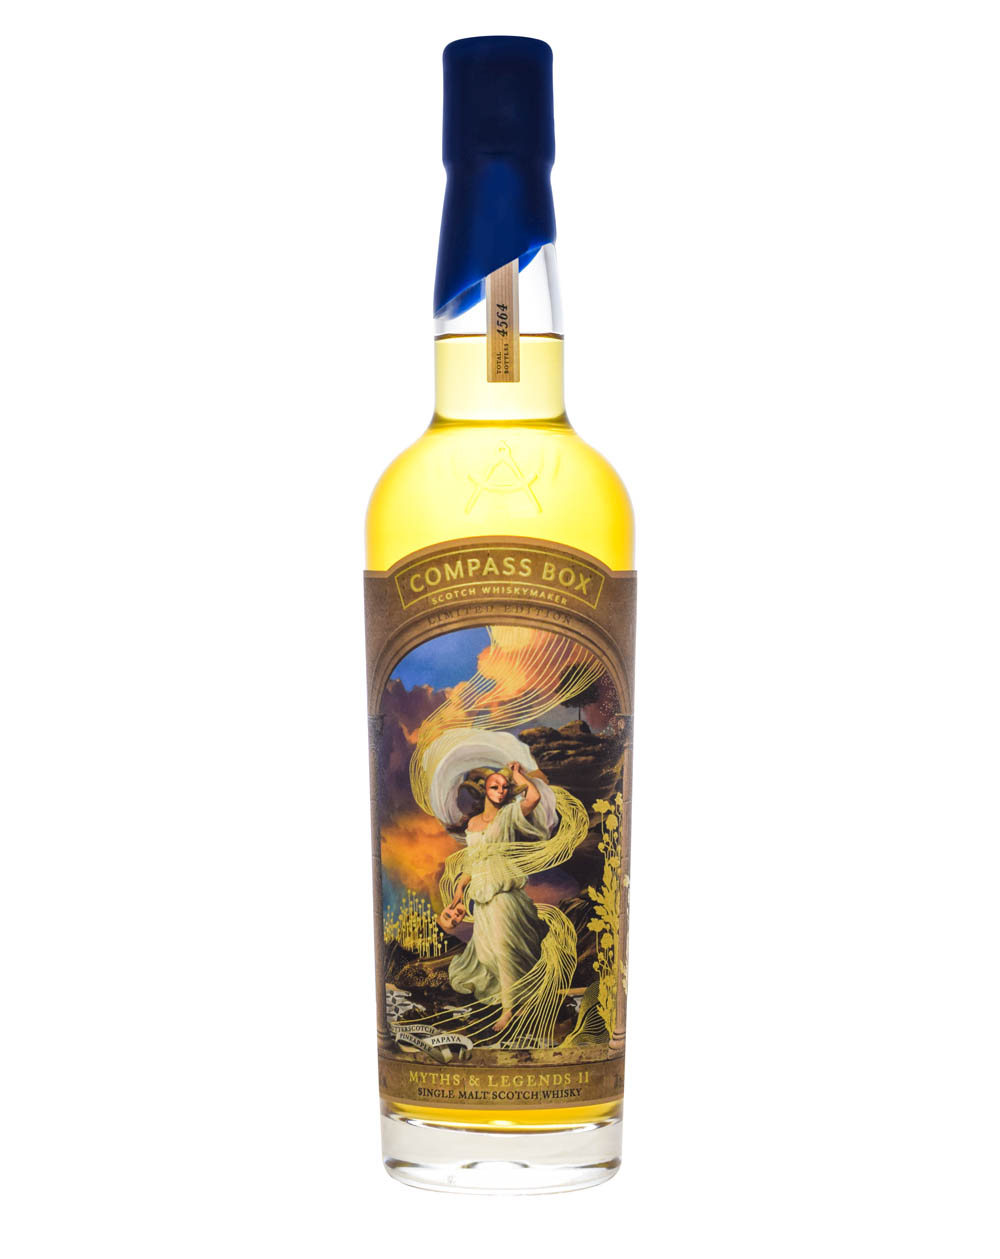 Compass Box Myths & Legends II Musthave Malts MHM